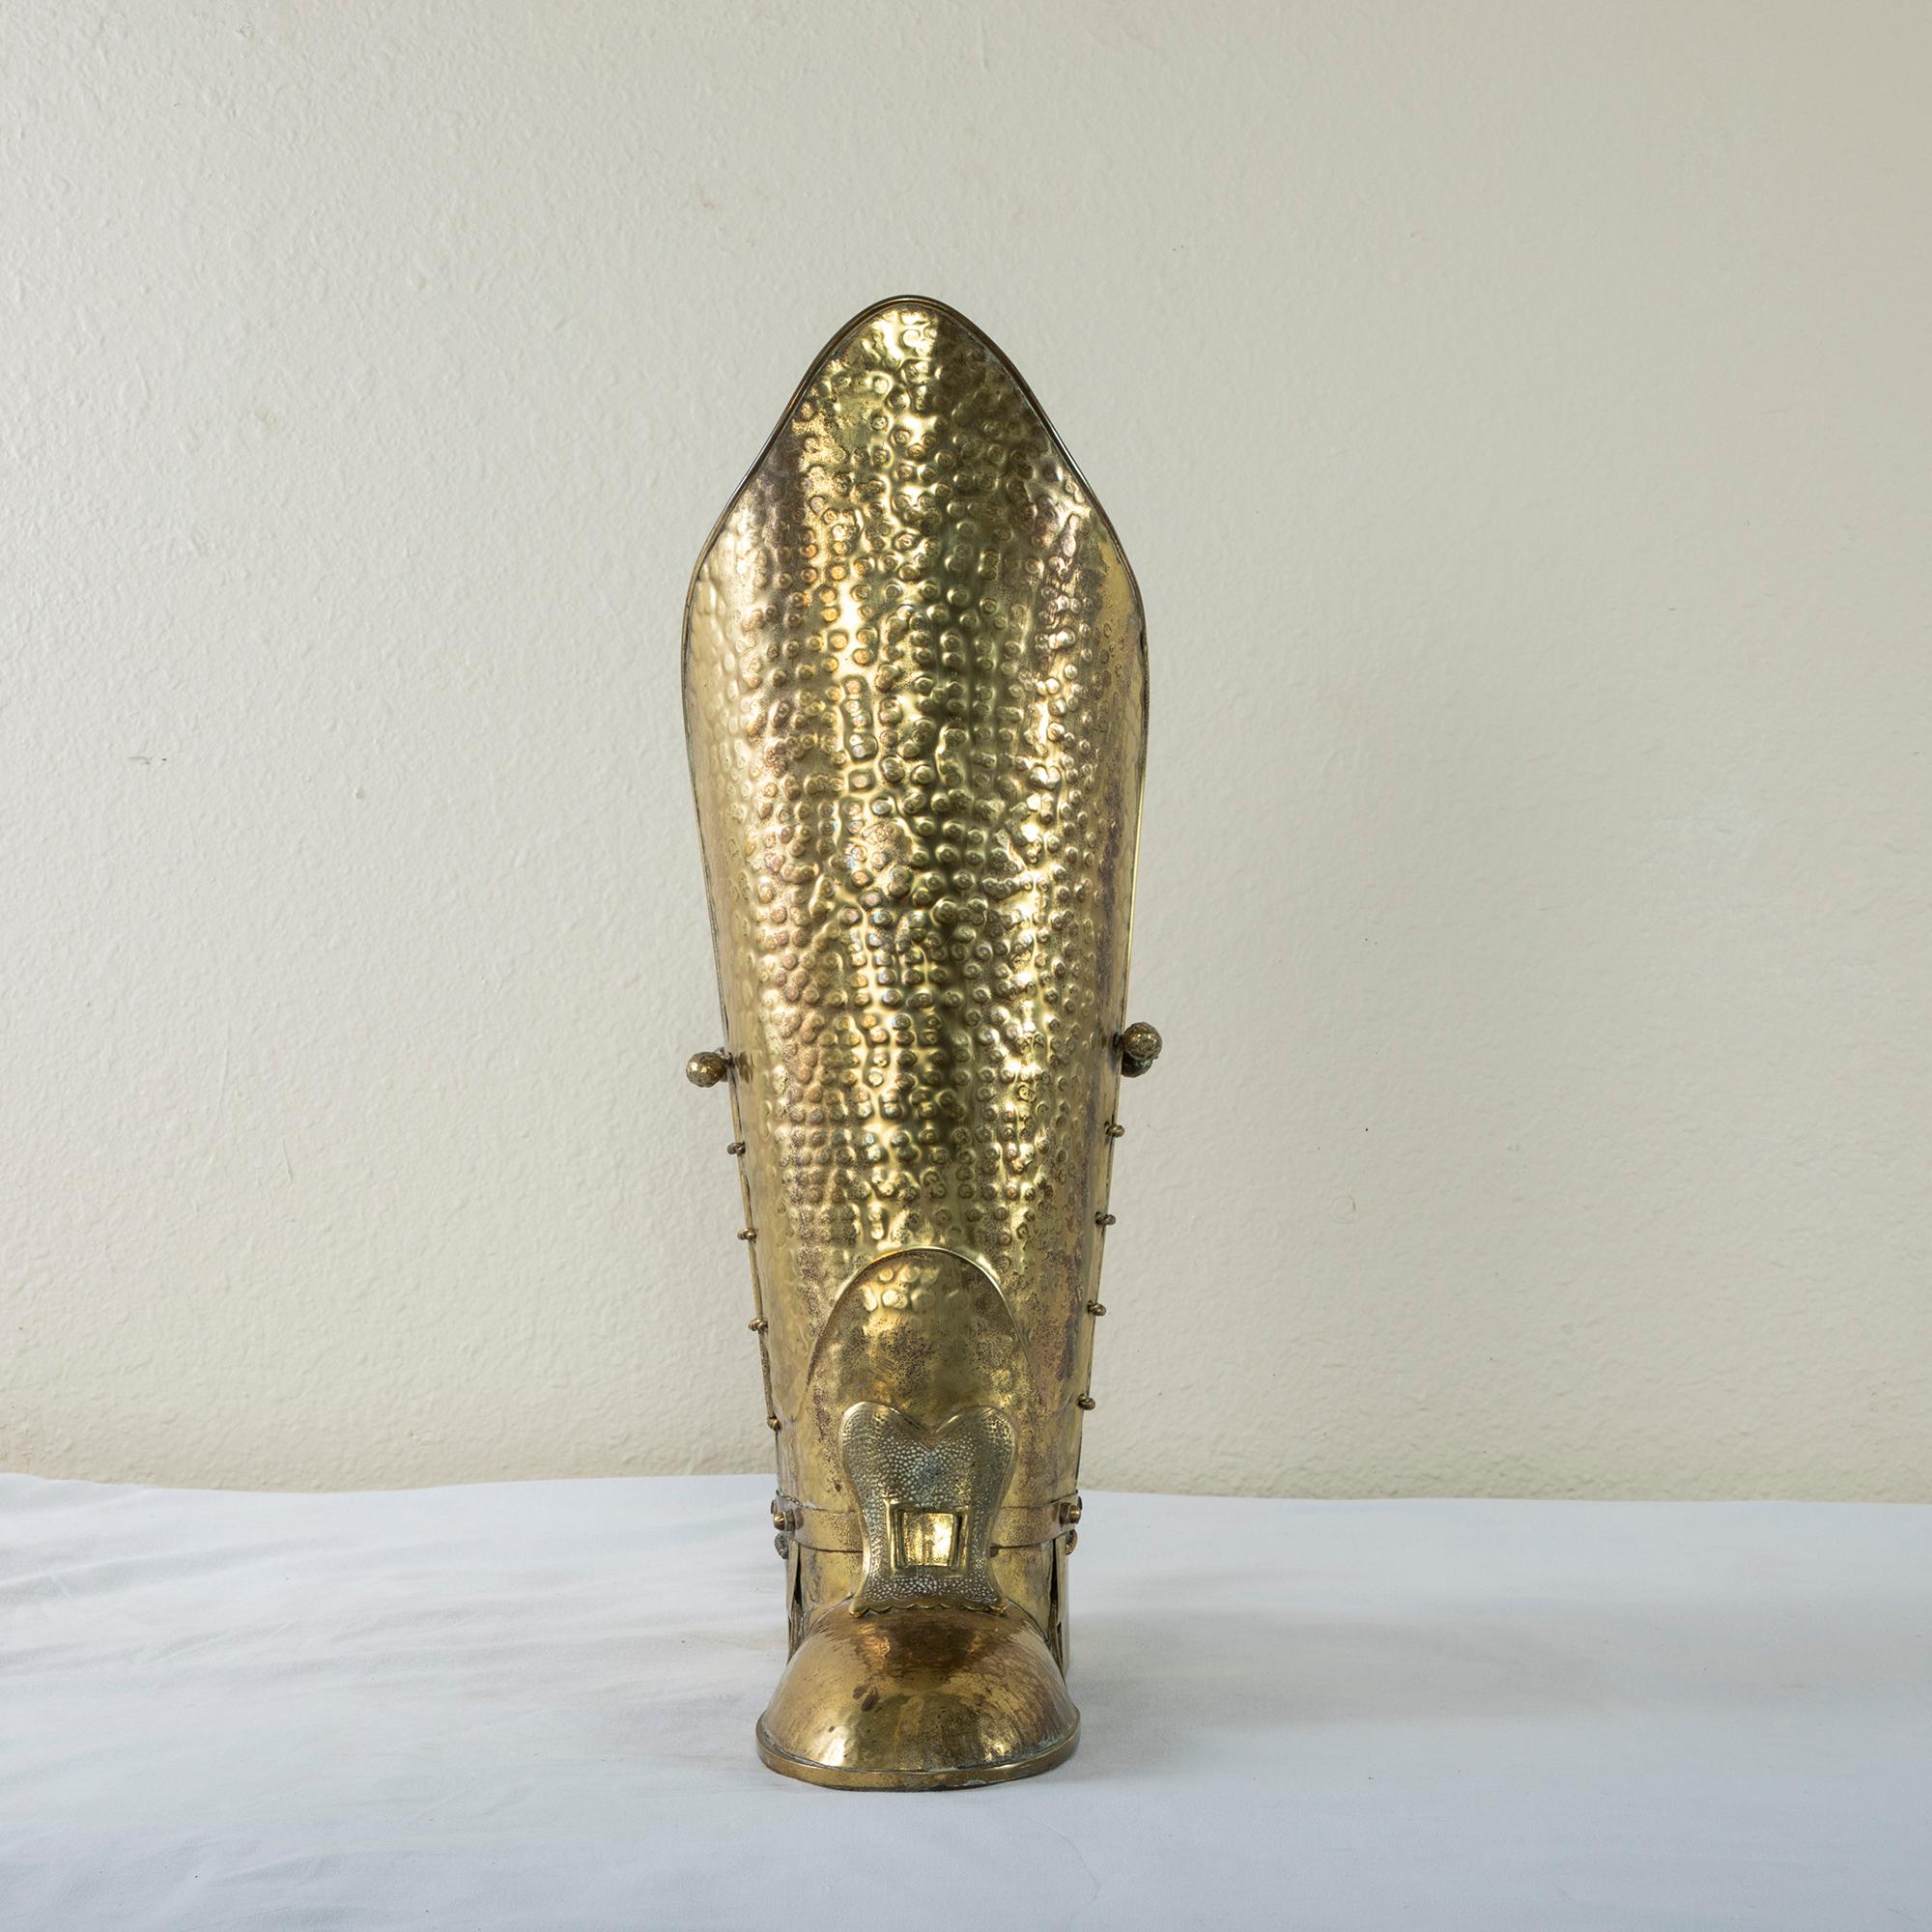 Standing at 22 inches in height, this mid-20th century hand-hammered brass umbrella stand from Italy takes the form of a large riding boot. The boot is detailed with a buckle at the front and a spur at the heel. Twisted brass lacing and straps